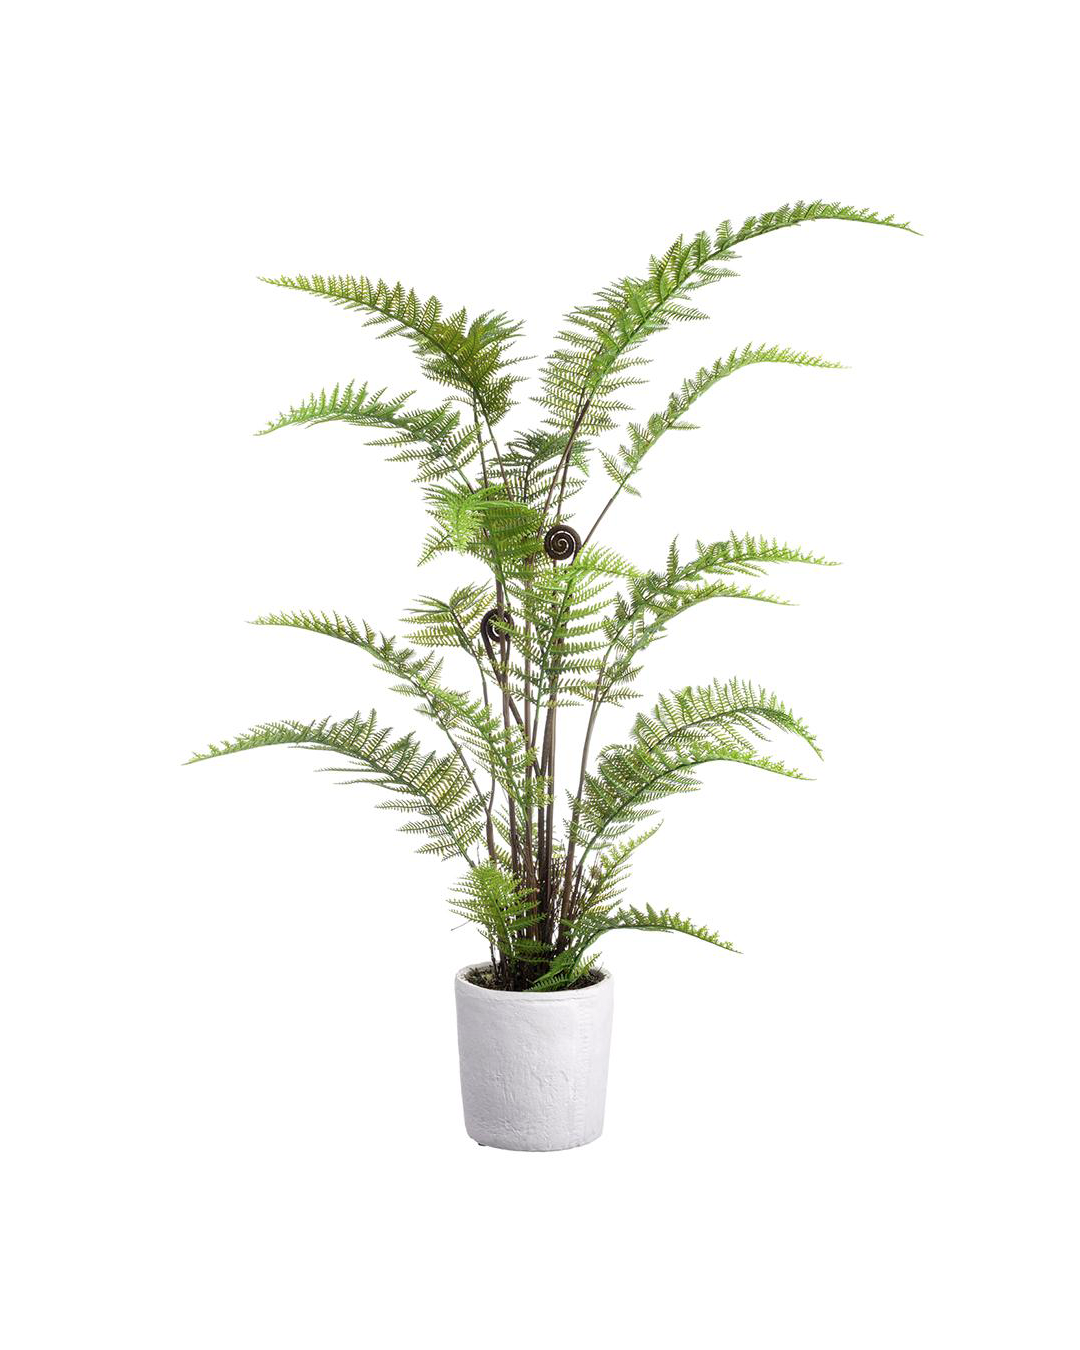 A 38" Leather Fern Plant in a simple white pot, isolated on a white background at a Scottsdale, Arizona bungalow. The plant displays numerous vibrant fronds spreading upwards by AllState Floral And Craft.